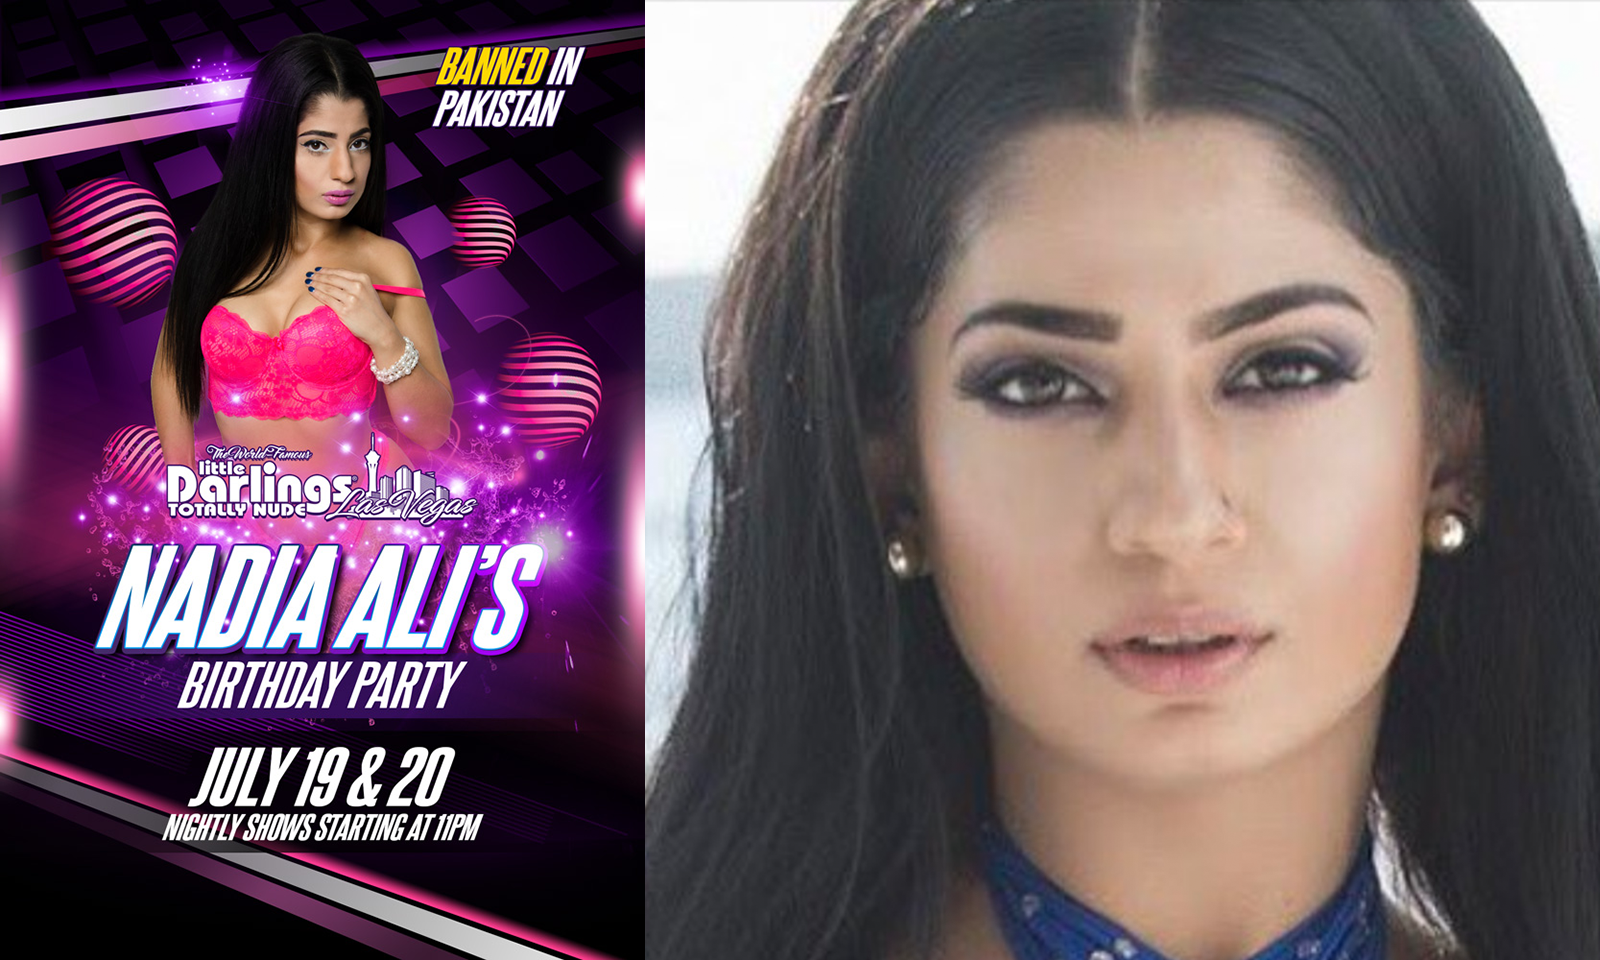 Nadia Ali To Feature At Little Darlings In Vegas This Weekend